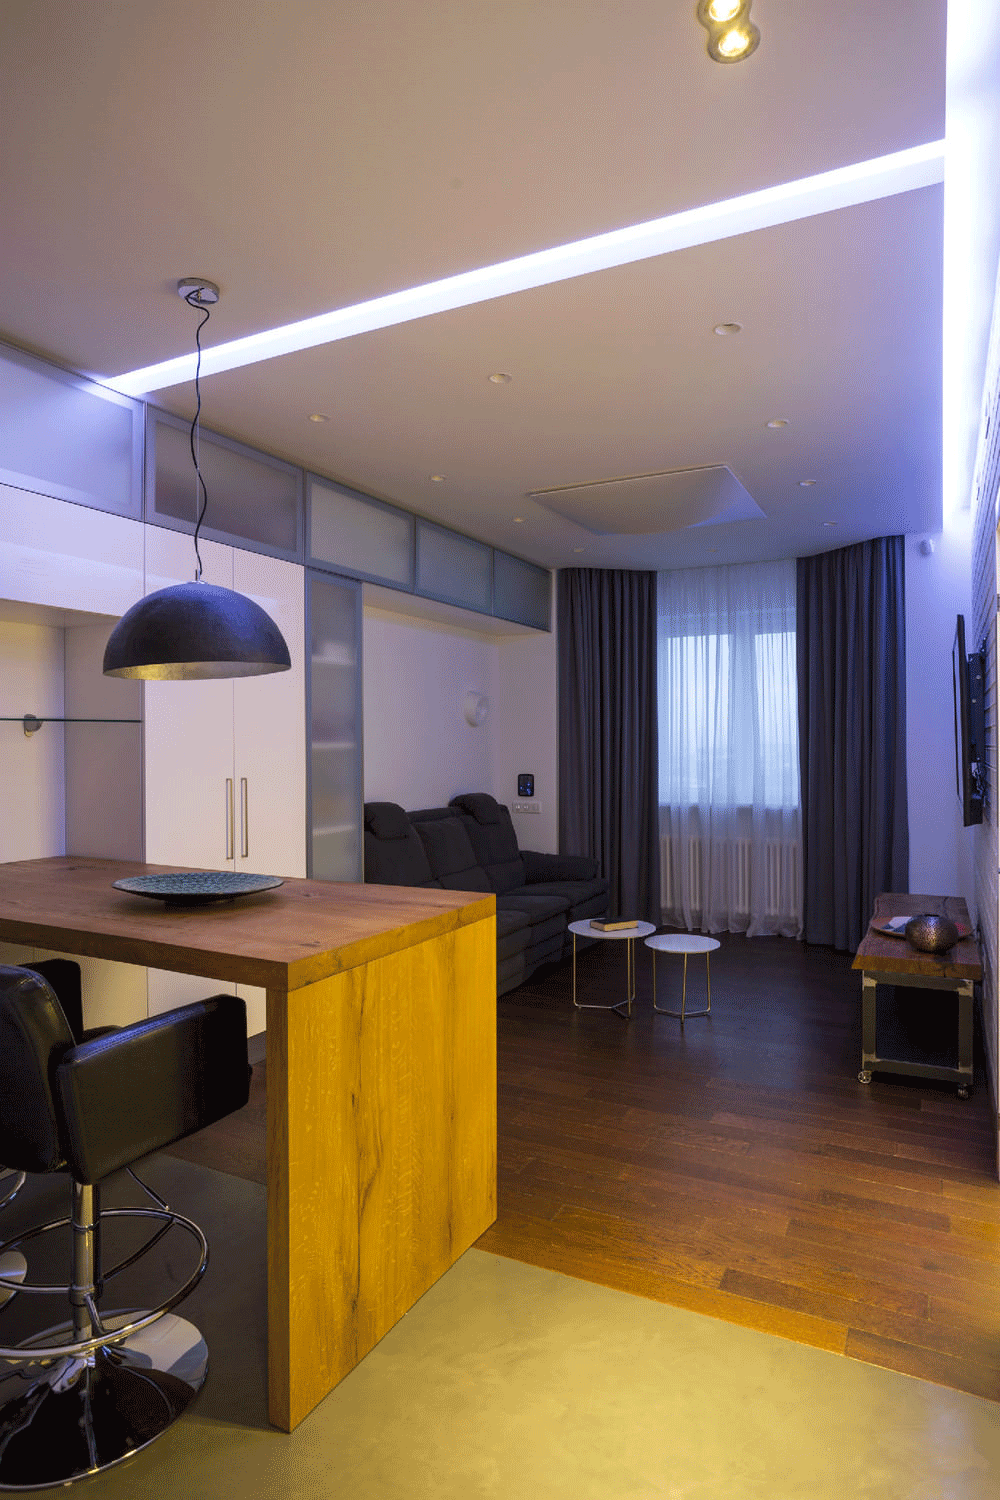 Lighting in the design of a two-room apartment of 43 sq. m.